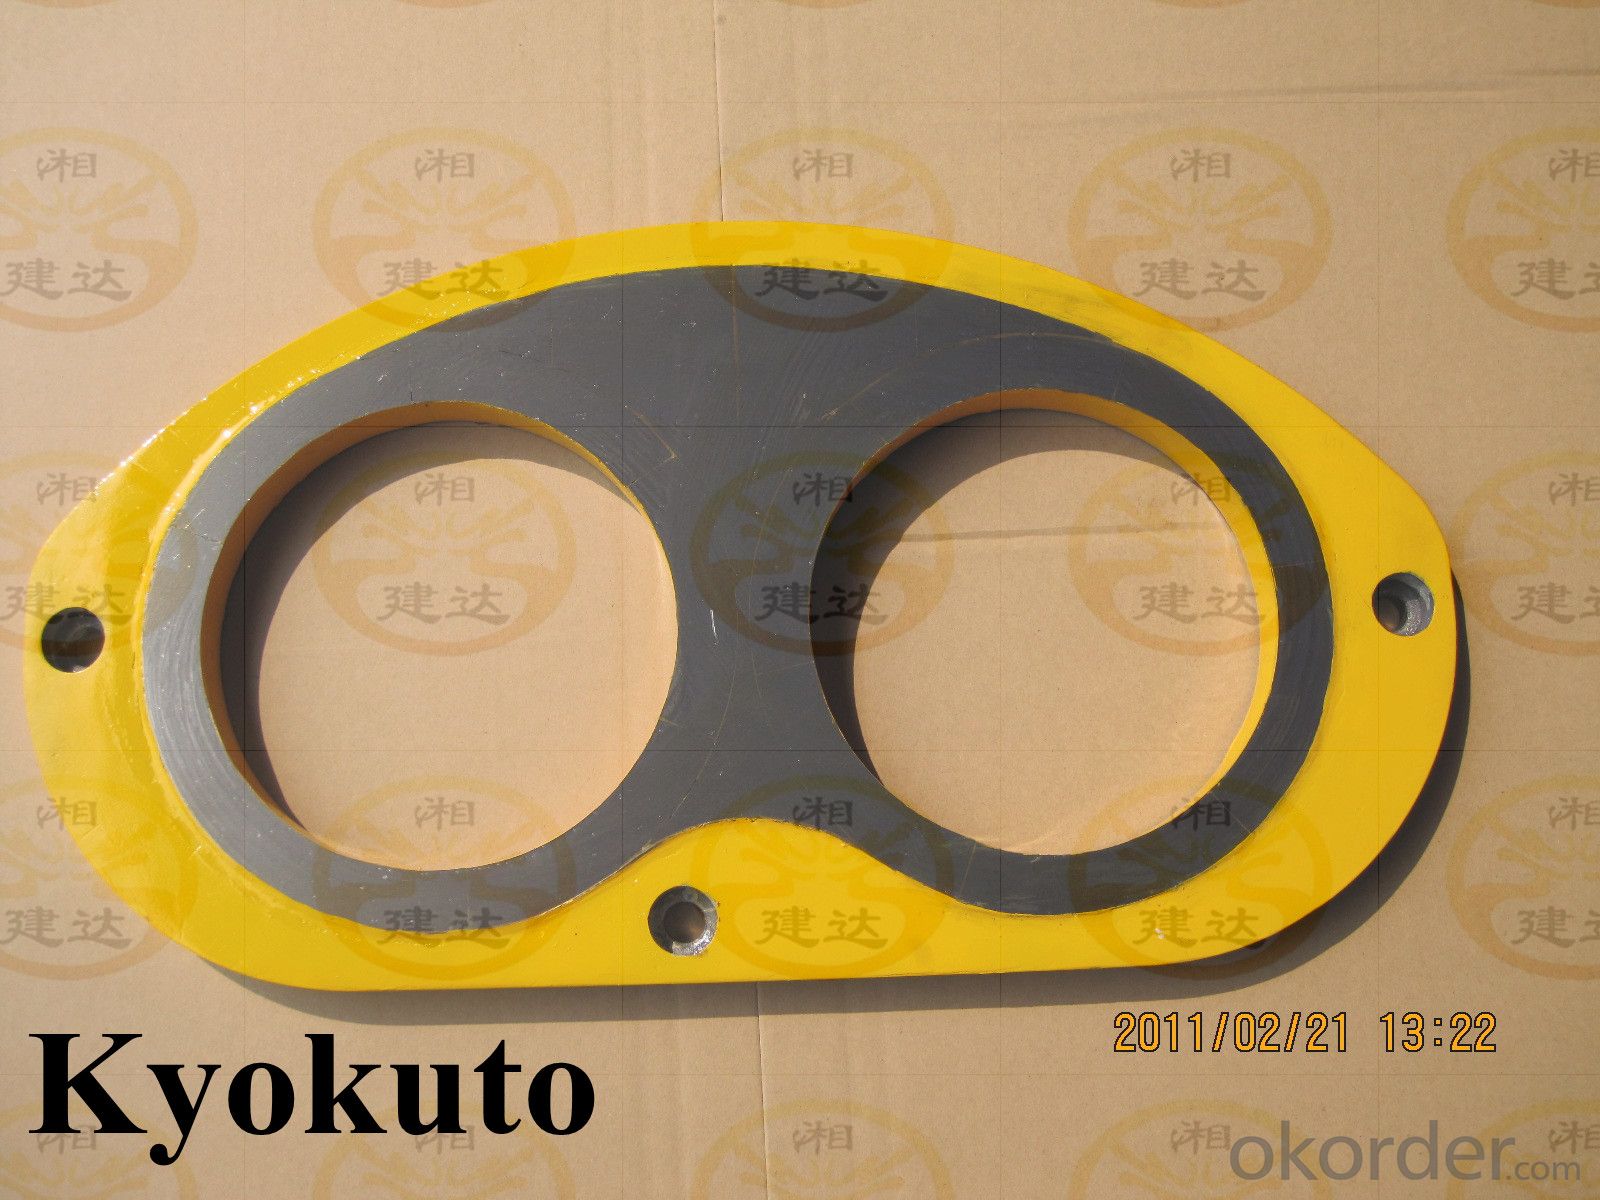 Spectacle wear plate  for Kyokuto concrete pump